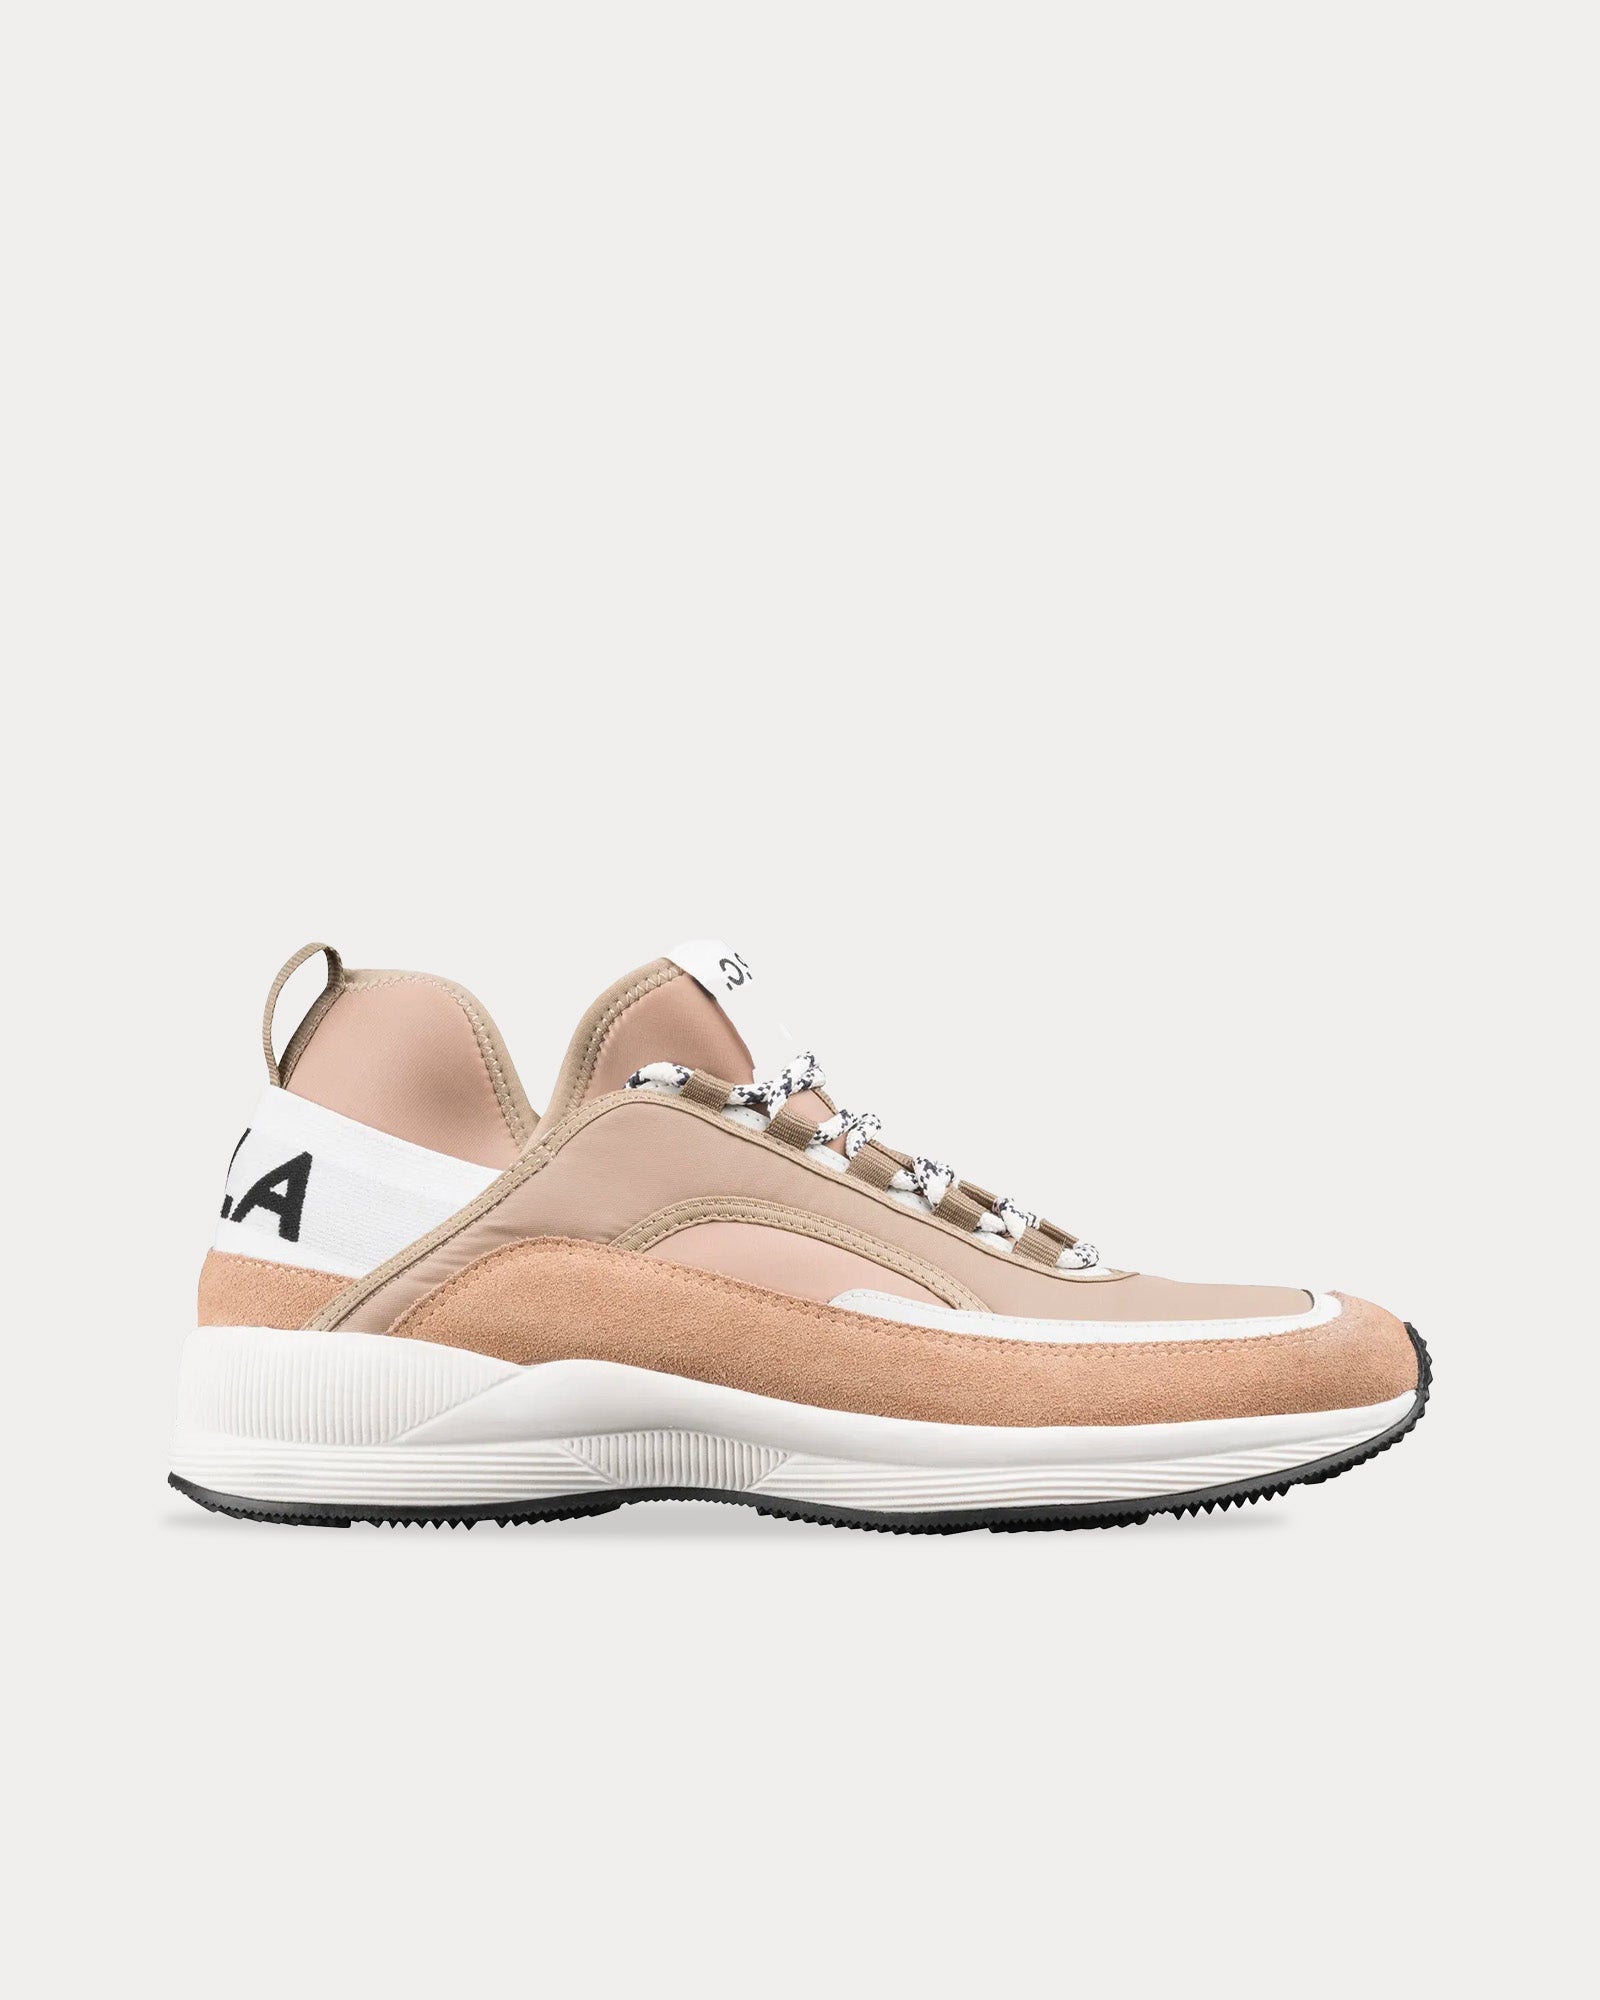 A.P.C. - Run Around Taupe Low Top Sneakers